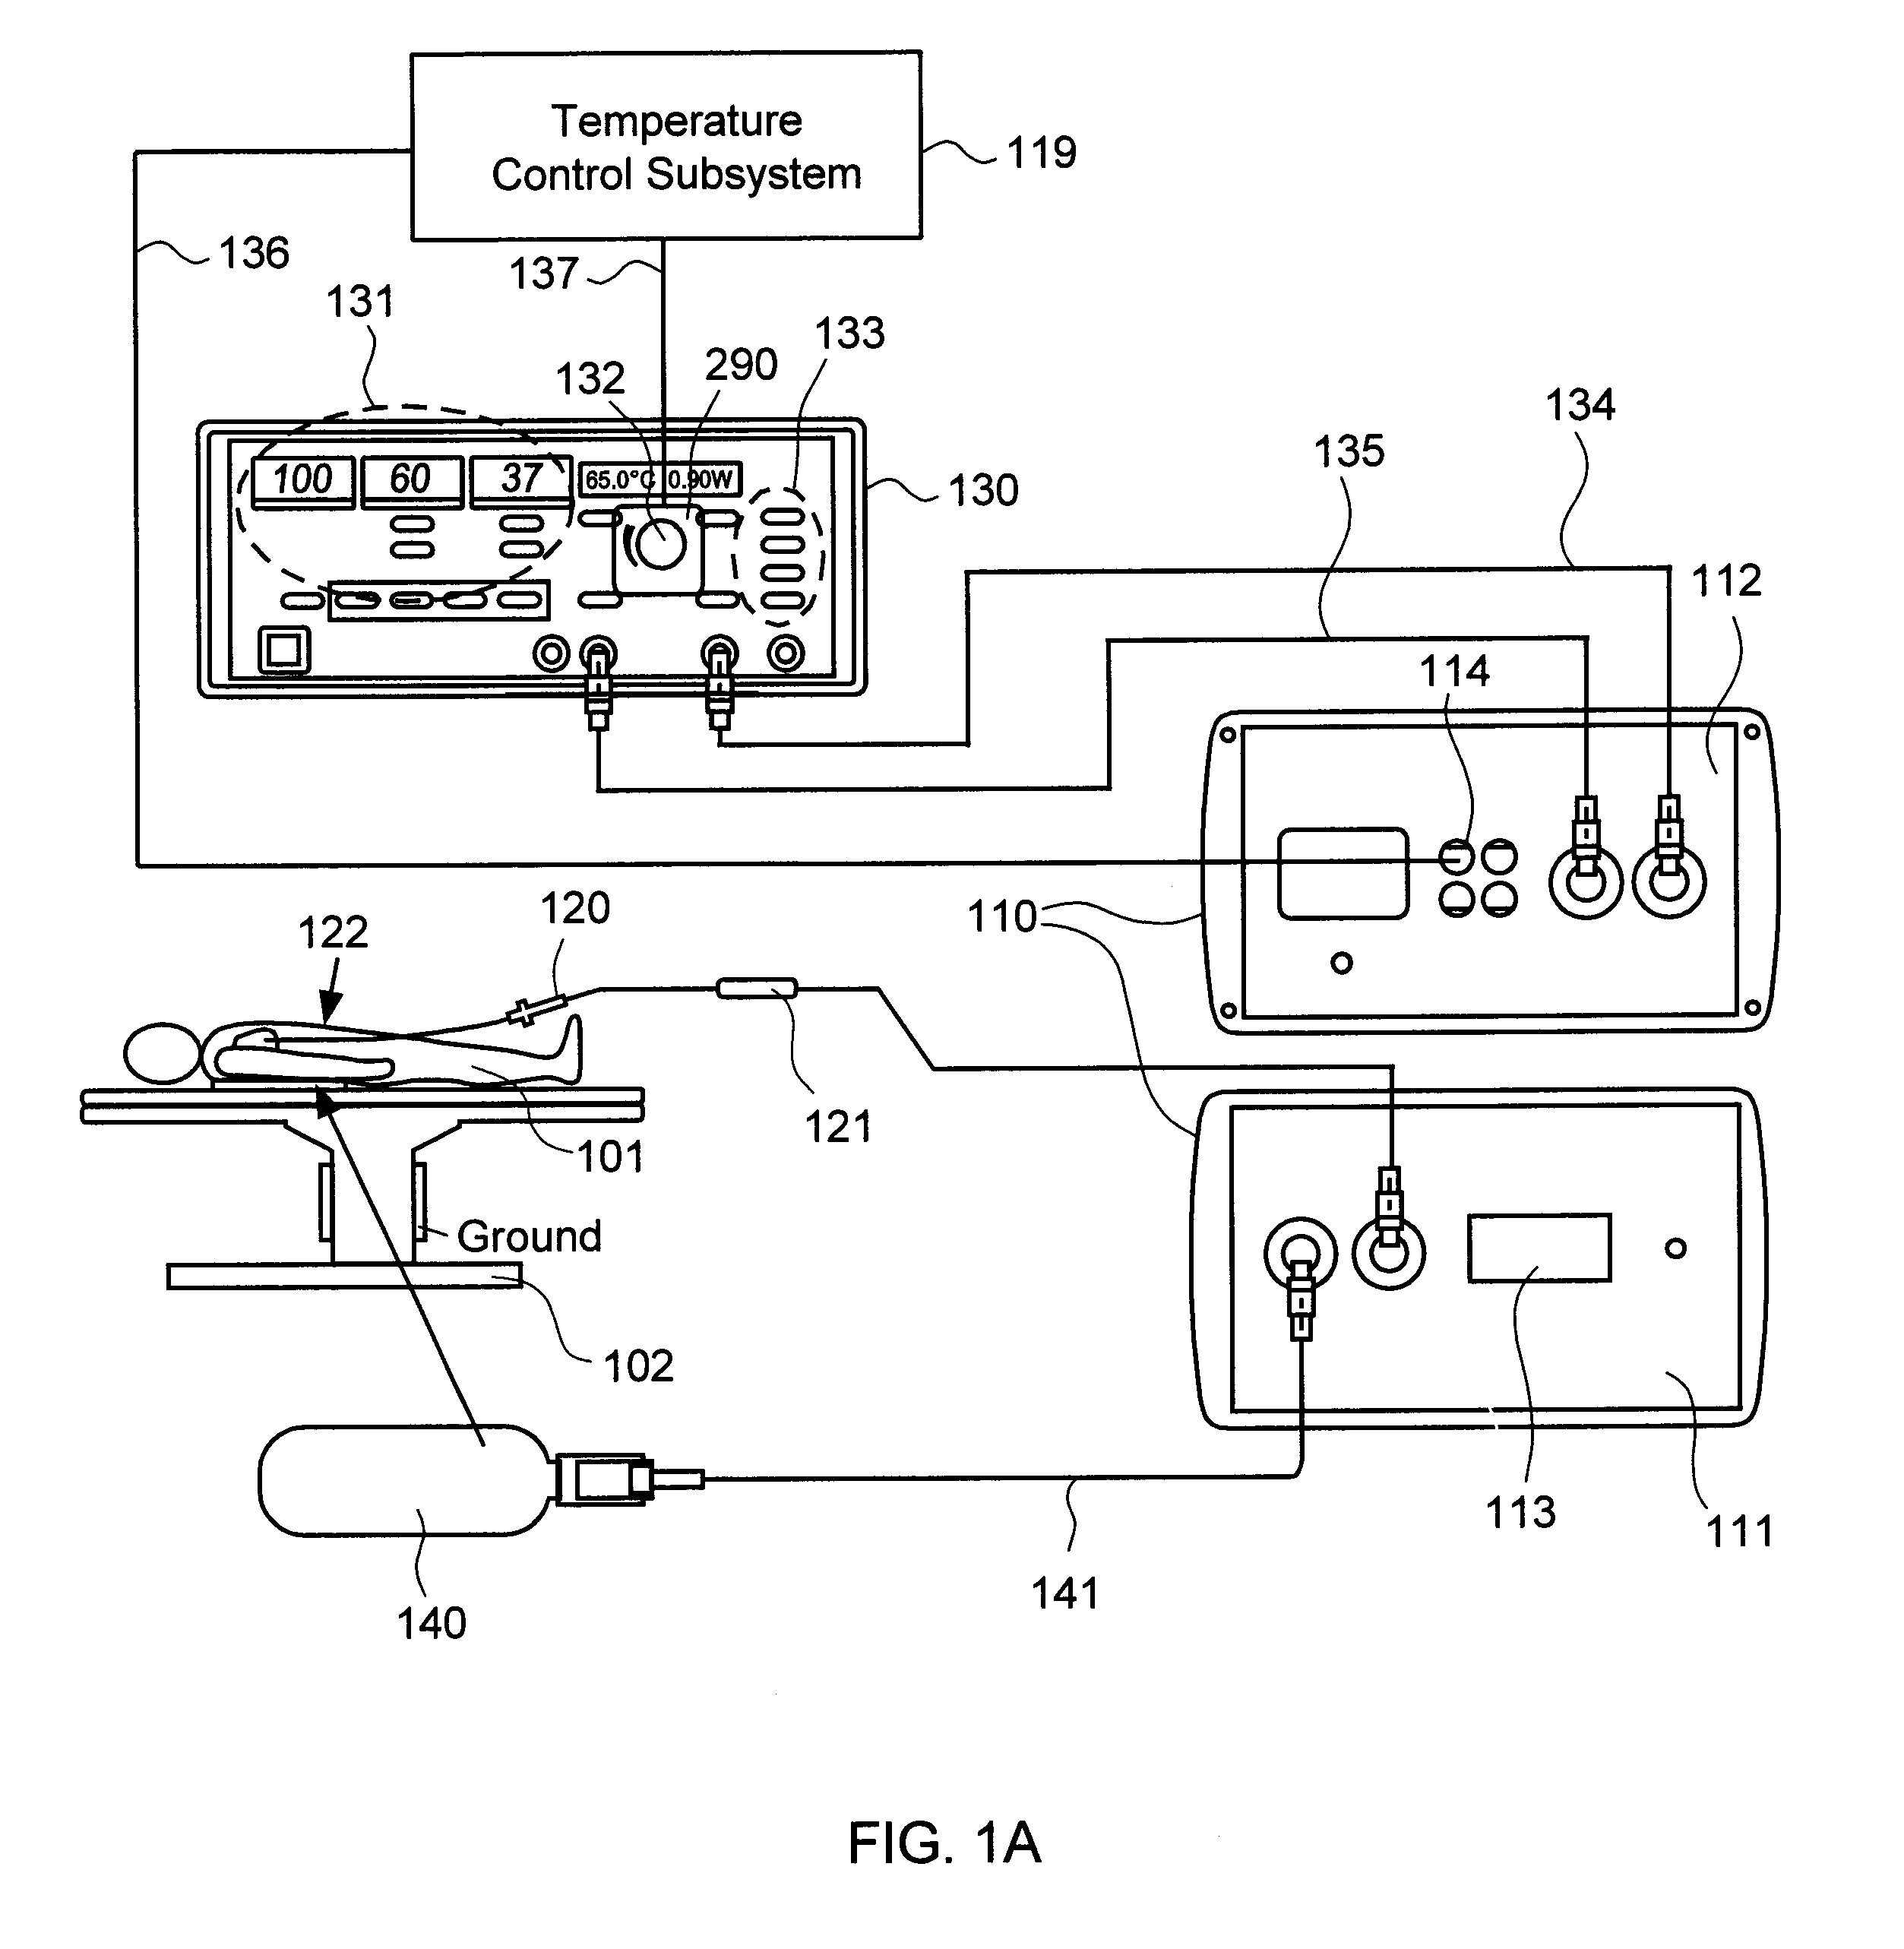 Systems and methods for temperature-controlled ablation using radiometric feedback in an interface module-based system